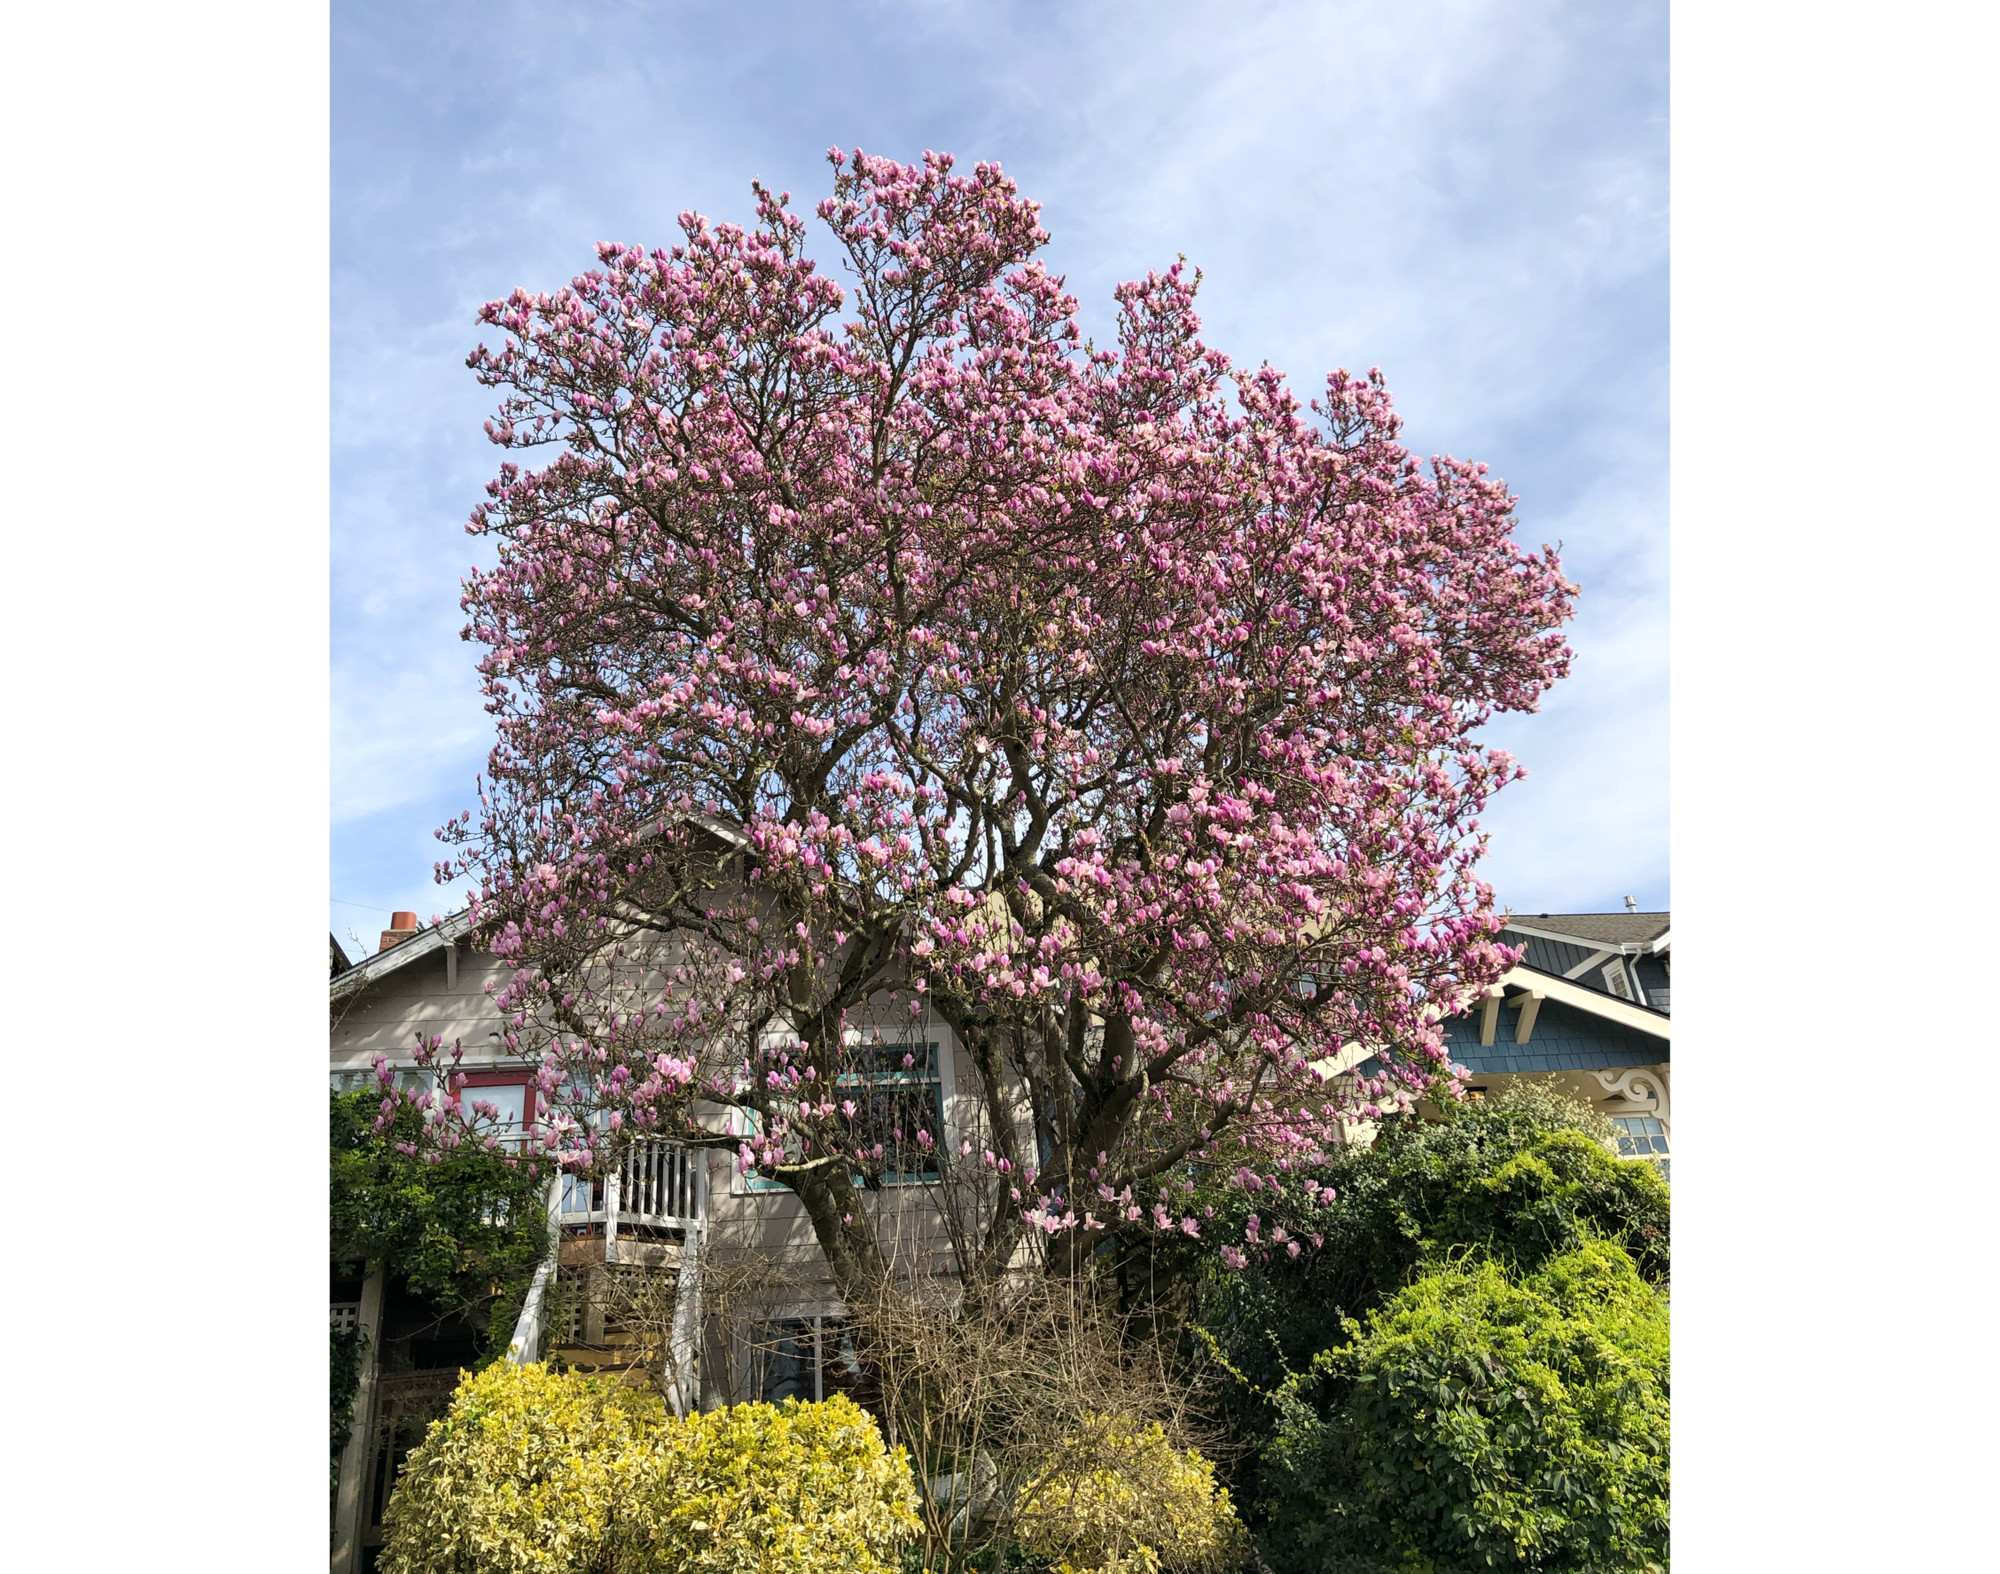 Photo of magnolia tree in full bloom in front of 2 houses, with shrubs in front